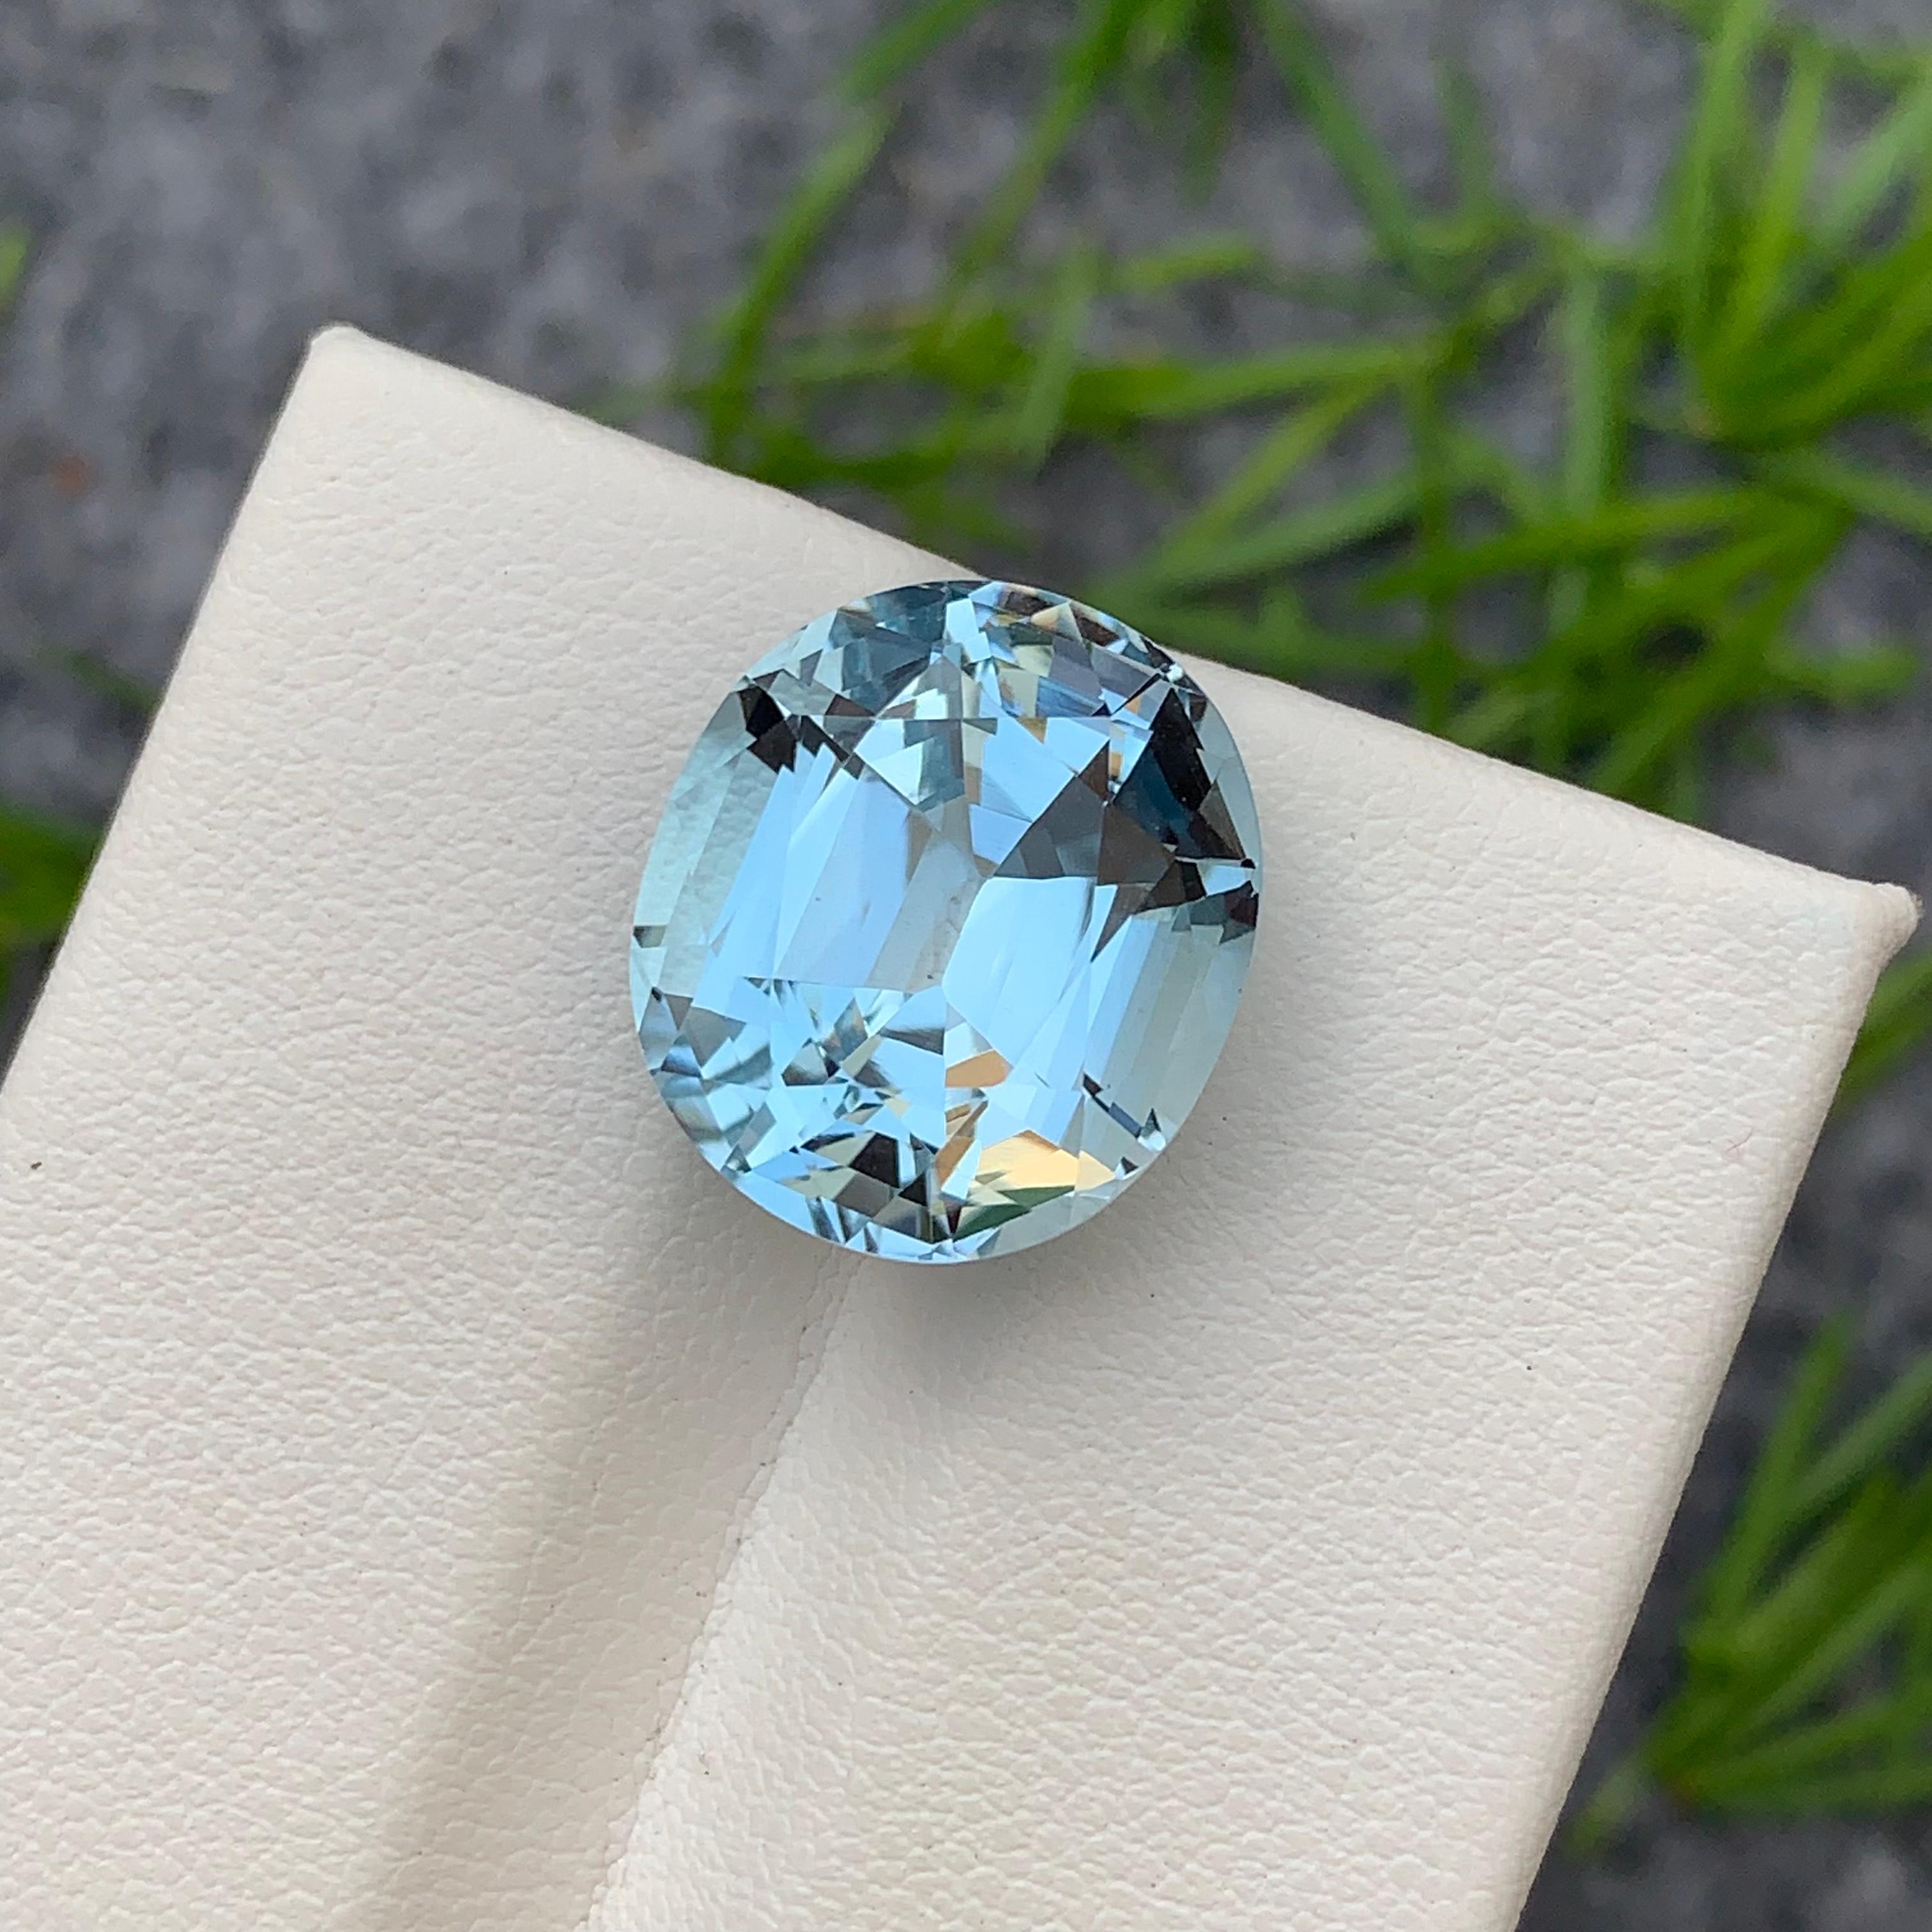 18.75 Carat Faceted Light Blue Topaz Cushion Cut Gemstone from Brazil Mine For Sale 7